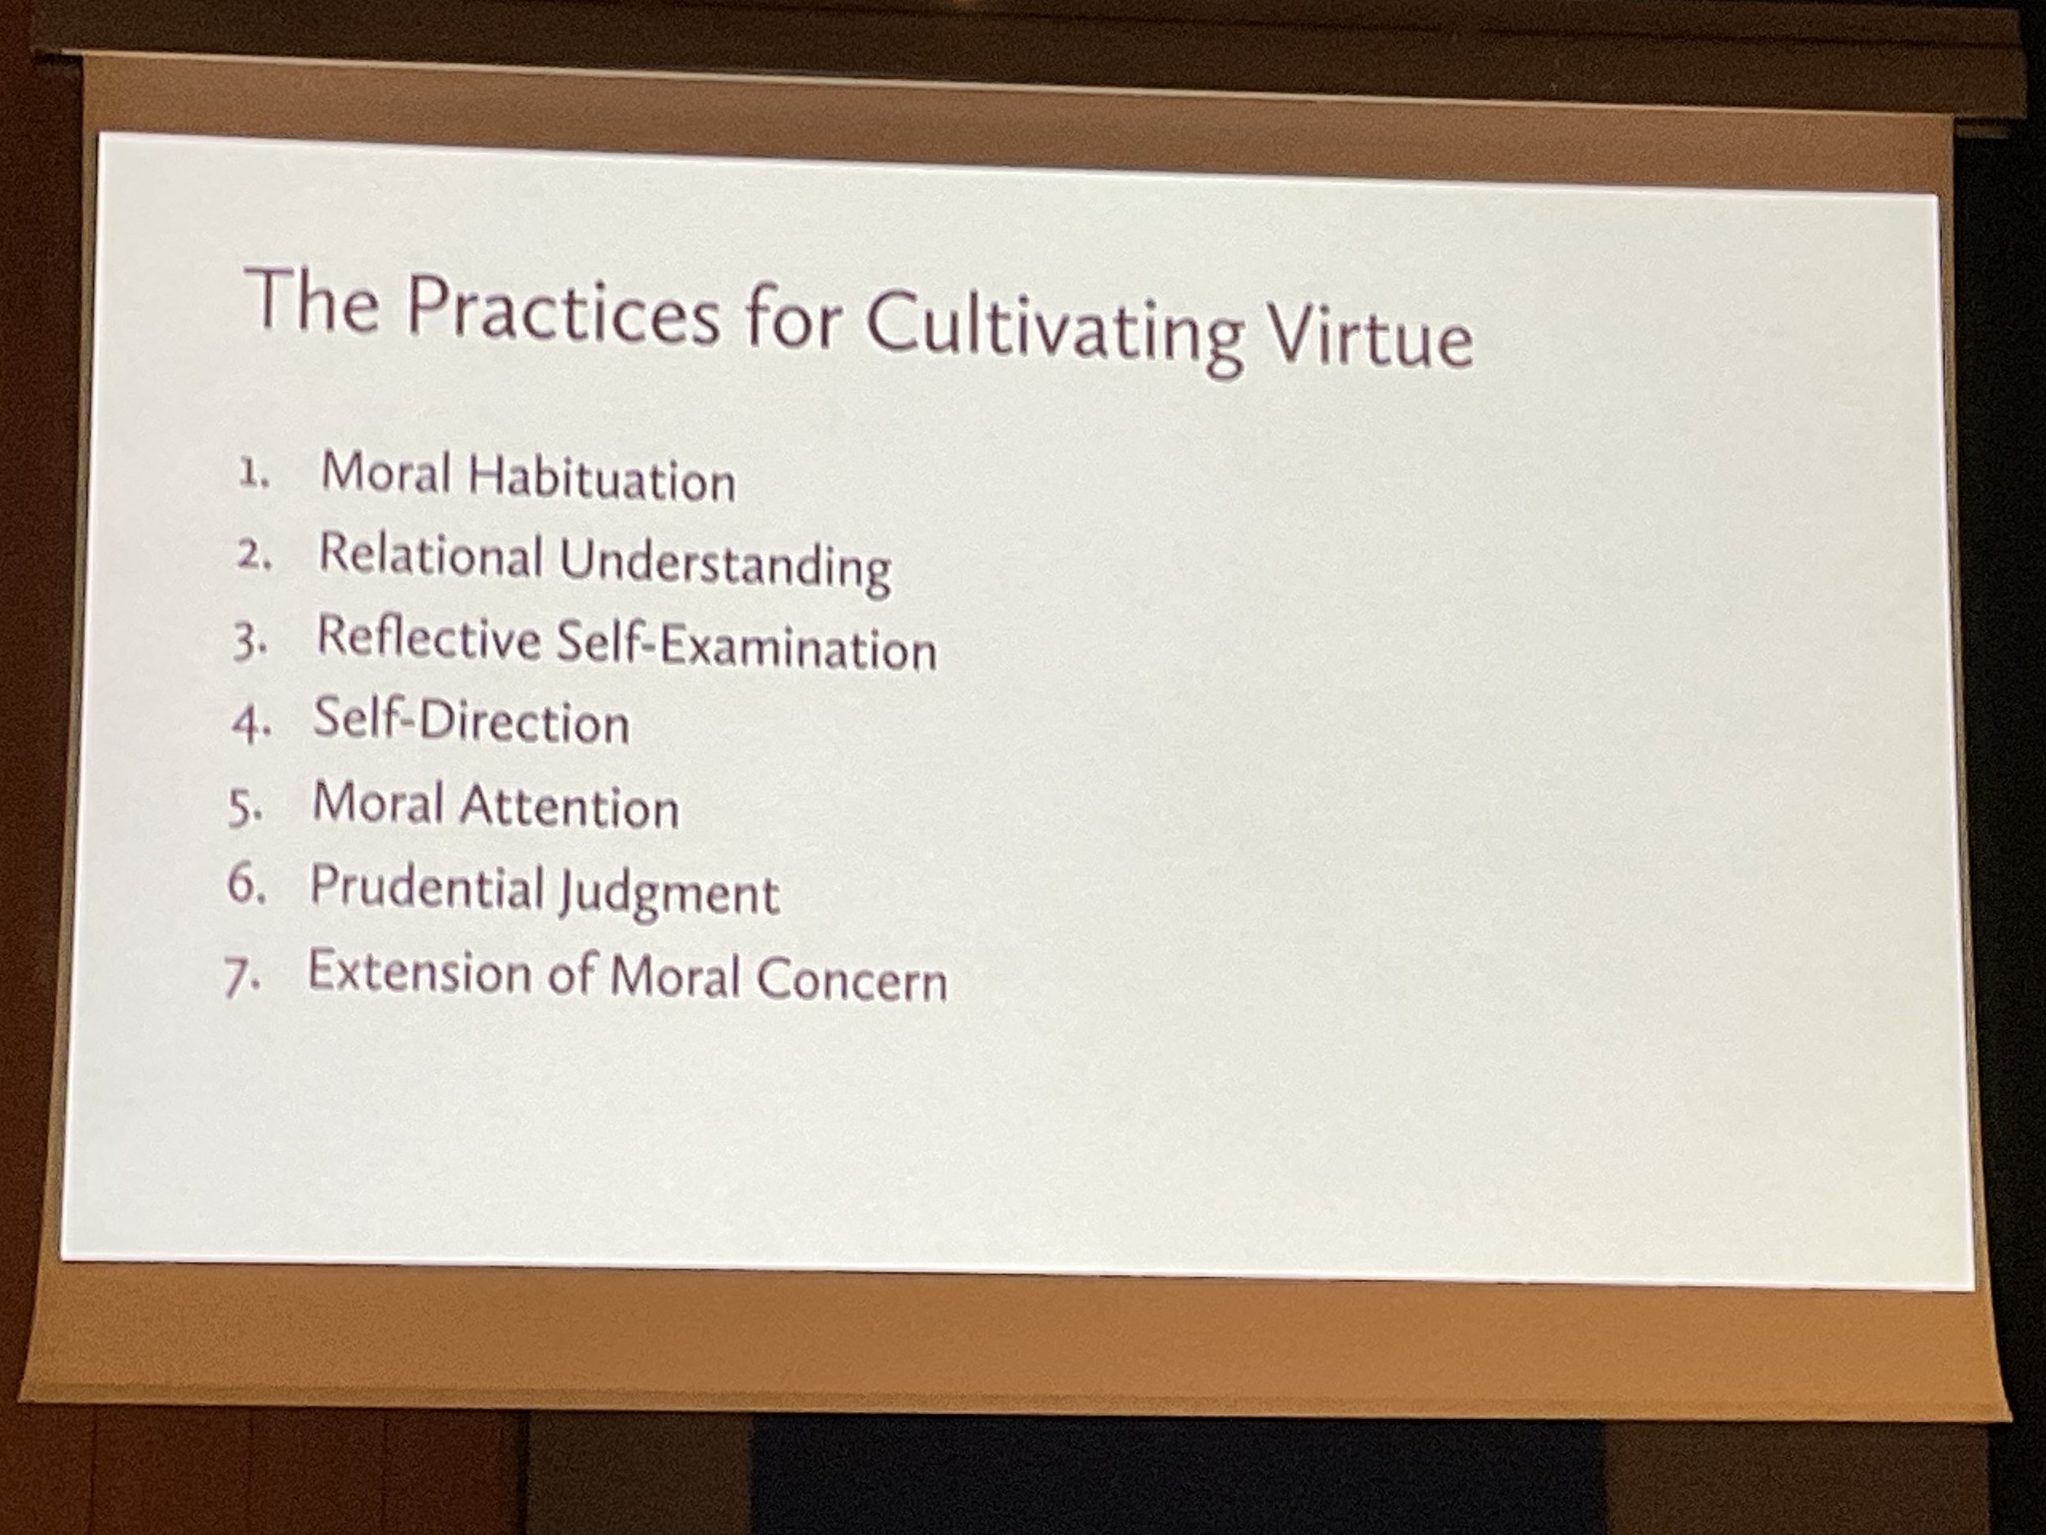 PowerPoint slide with the text: The practices for cultivating virtue. 1. Moral habituation. 2. Relational understanding. 3. Reflective self-examination. 4. Self-direction. 5. Moral attention. 6. Prudential judgment. 7. Extension of moral concern.